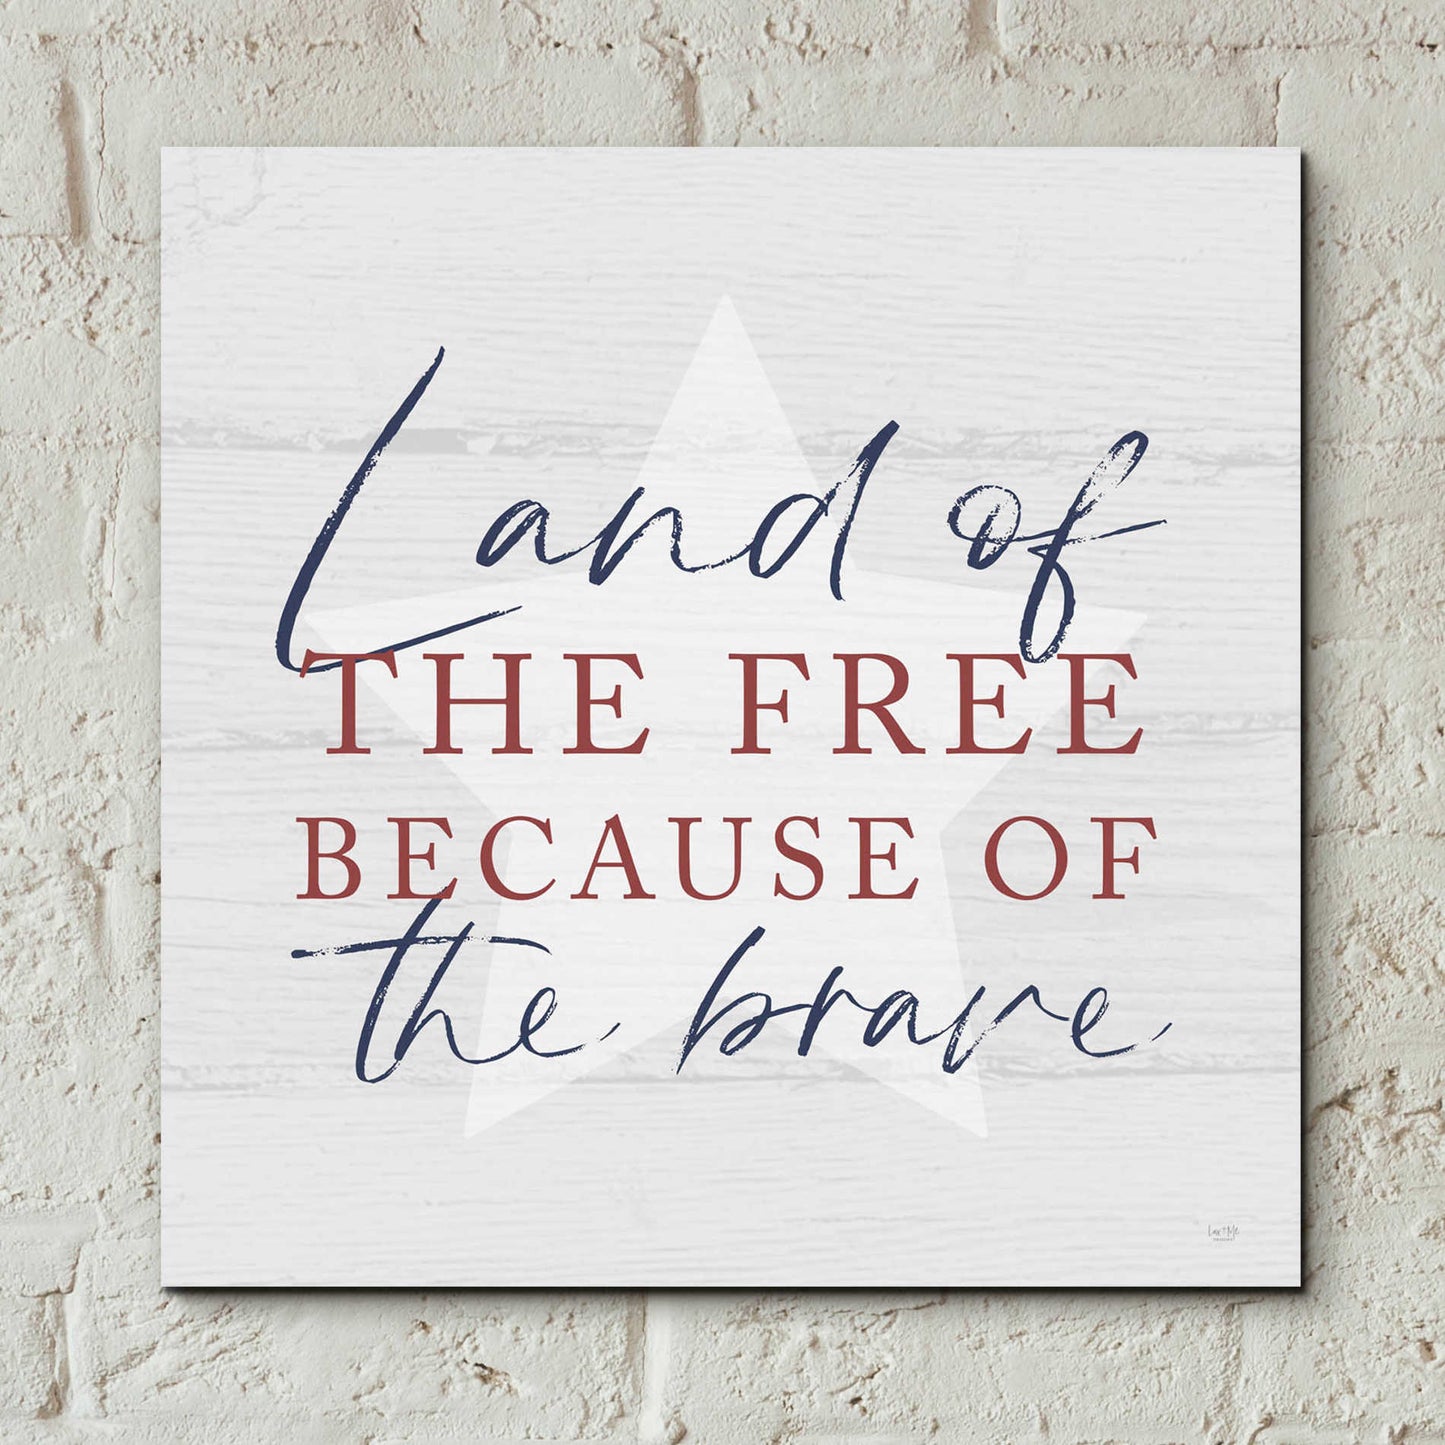 Epic Art 'Land of the Free' by Lux + Me, Acrylic Glass Wall Art,12x12